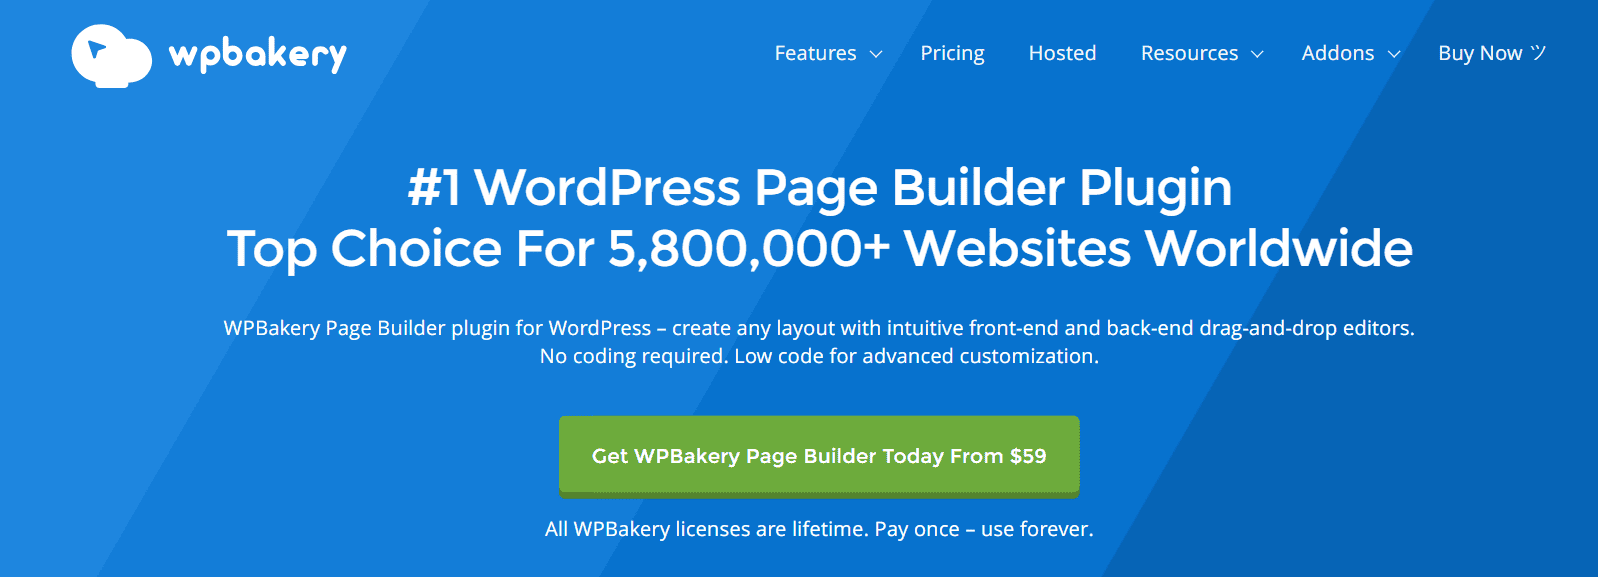 WPBakery Landing Page